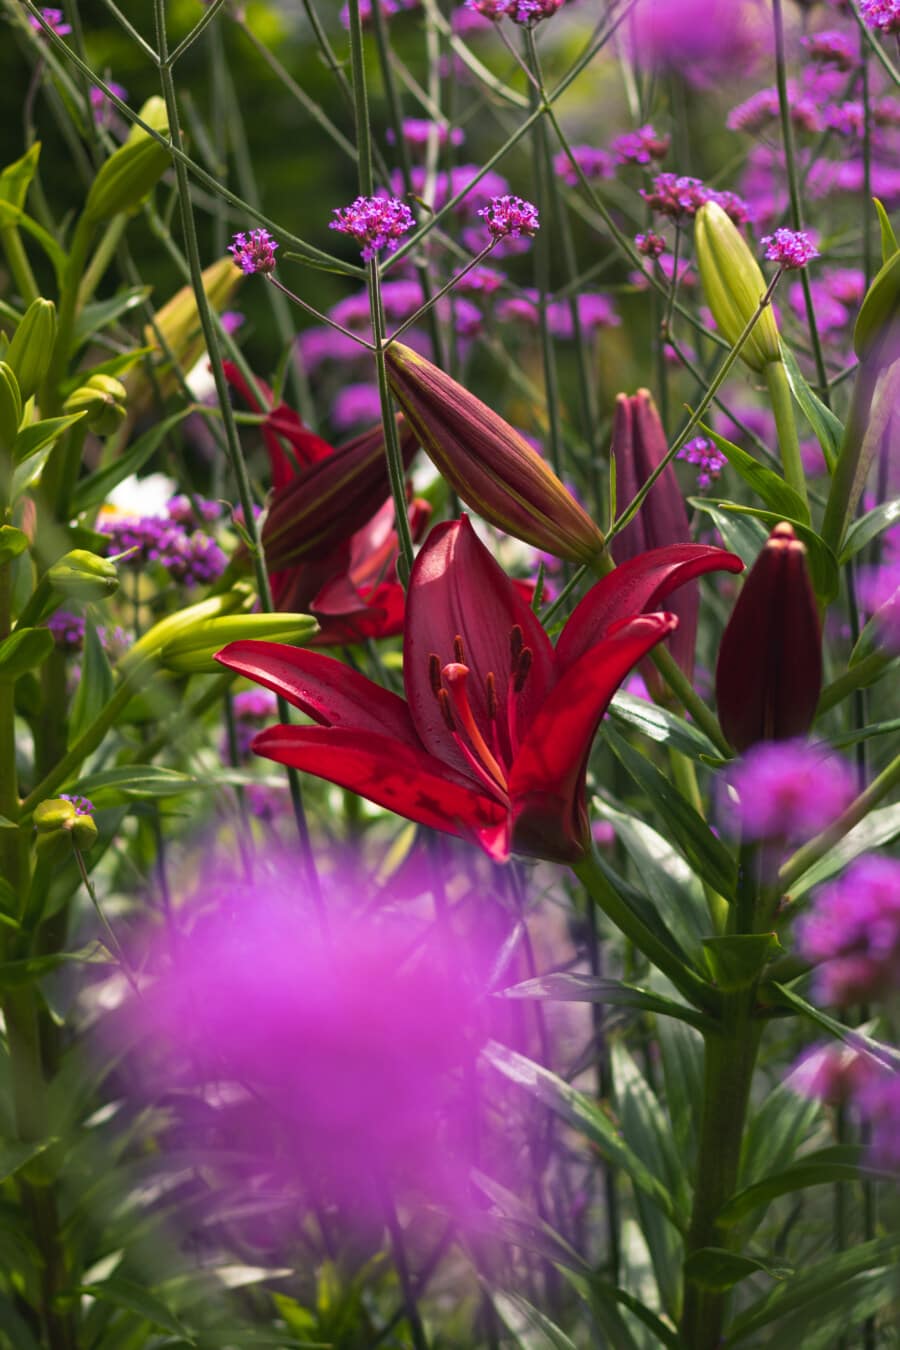 red, lily, grassy, flowers, nature, summer, blossom, flora, flower, plant